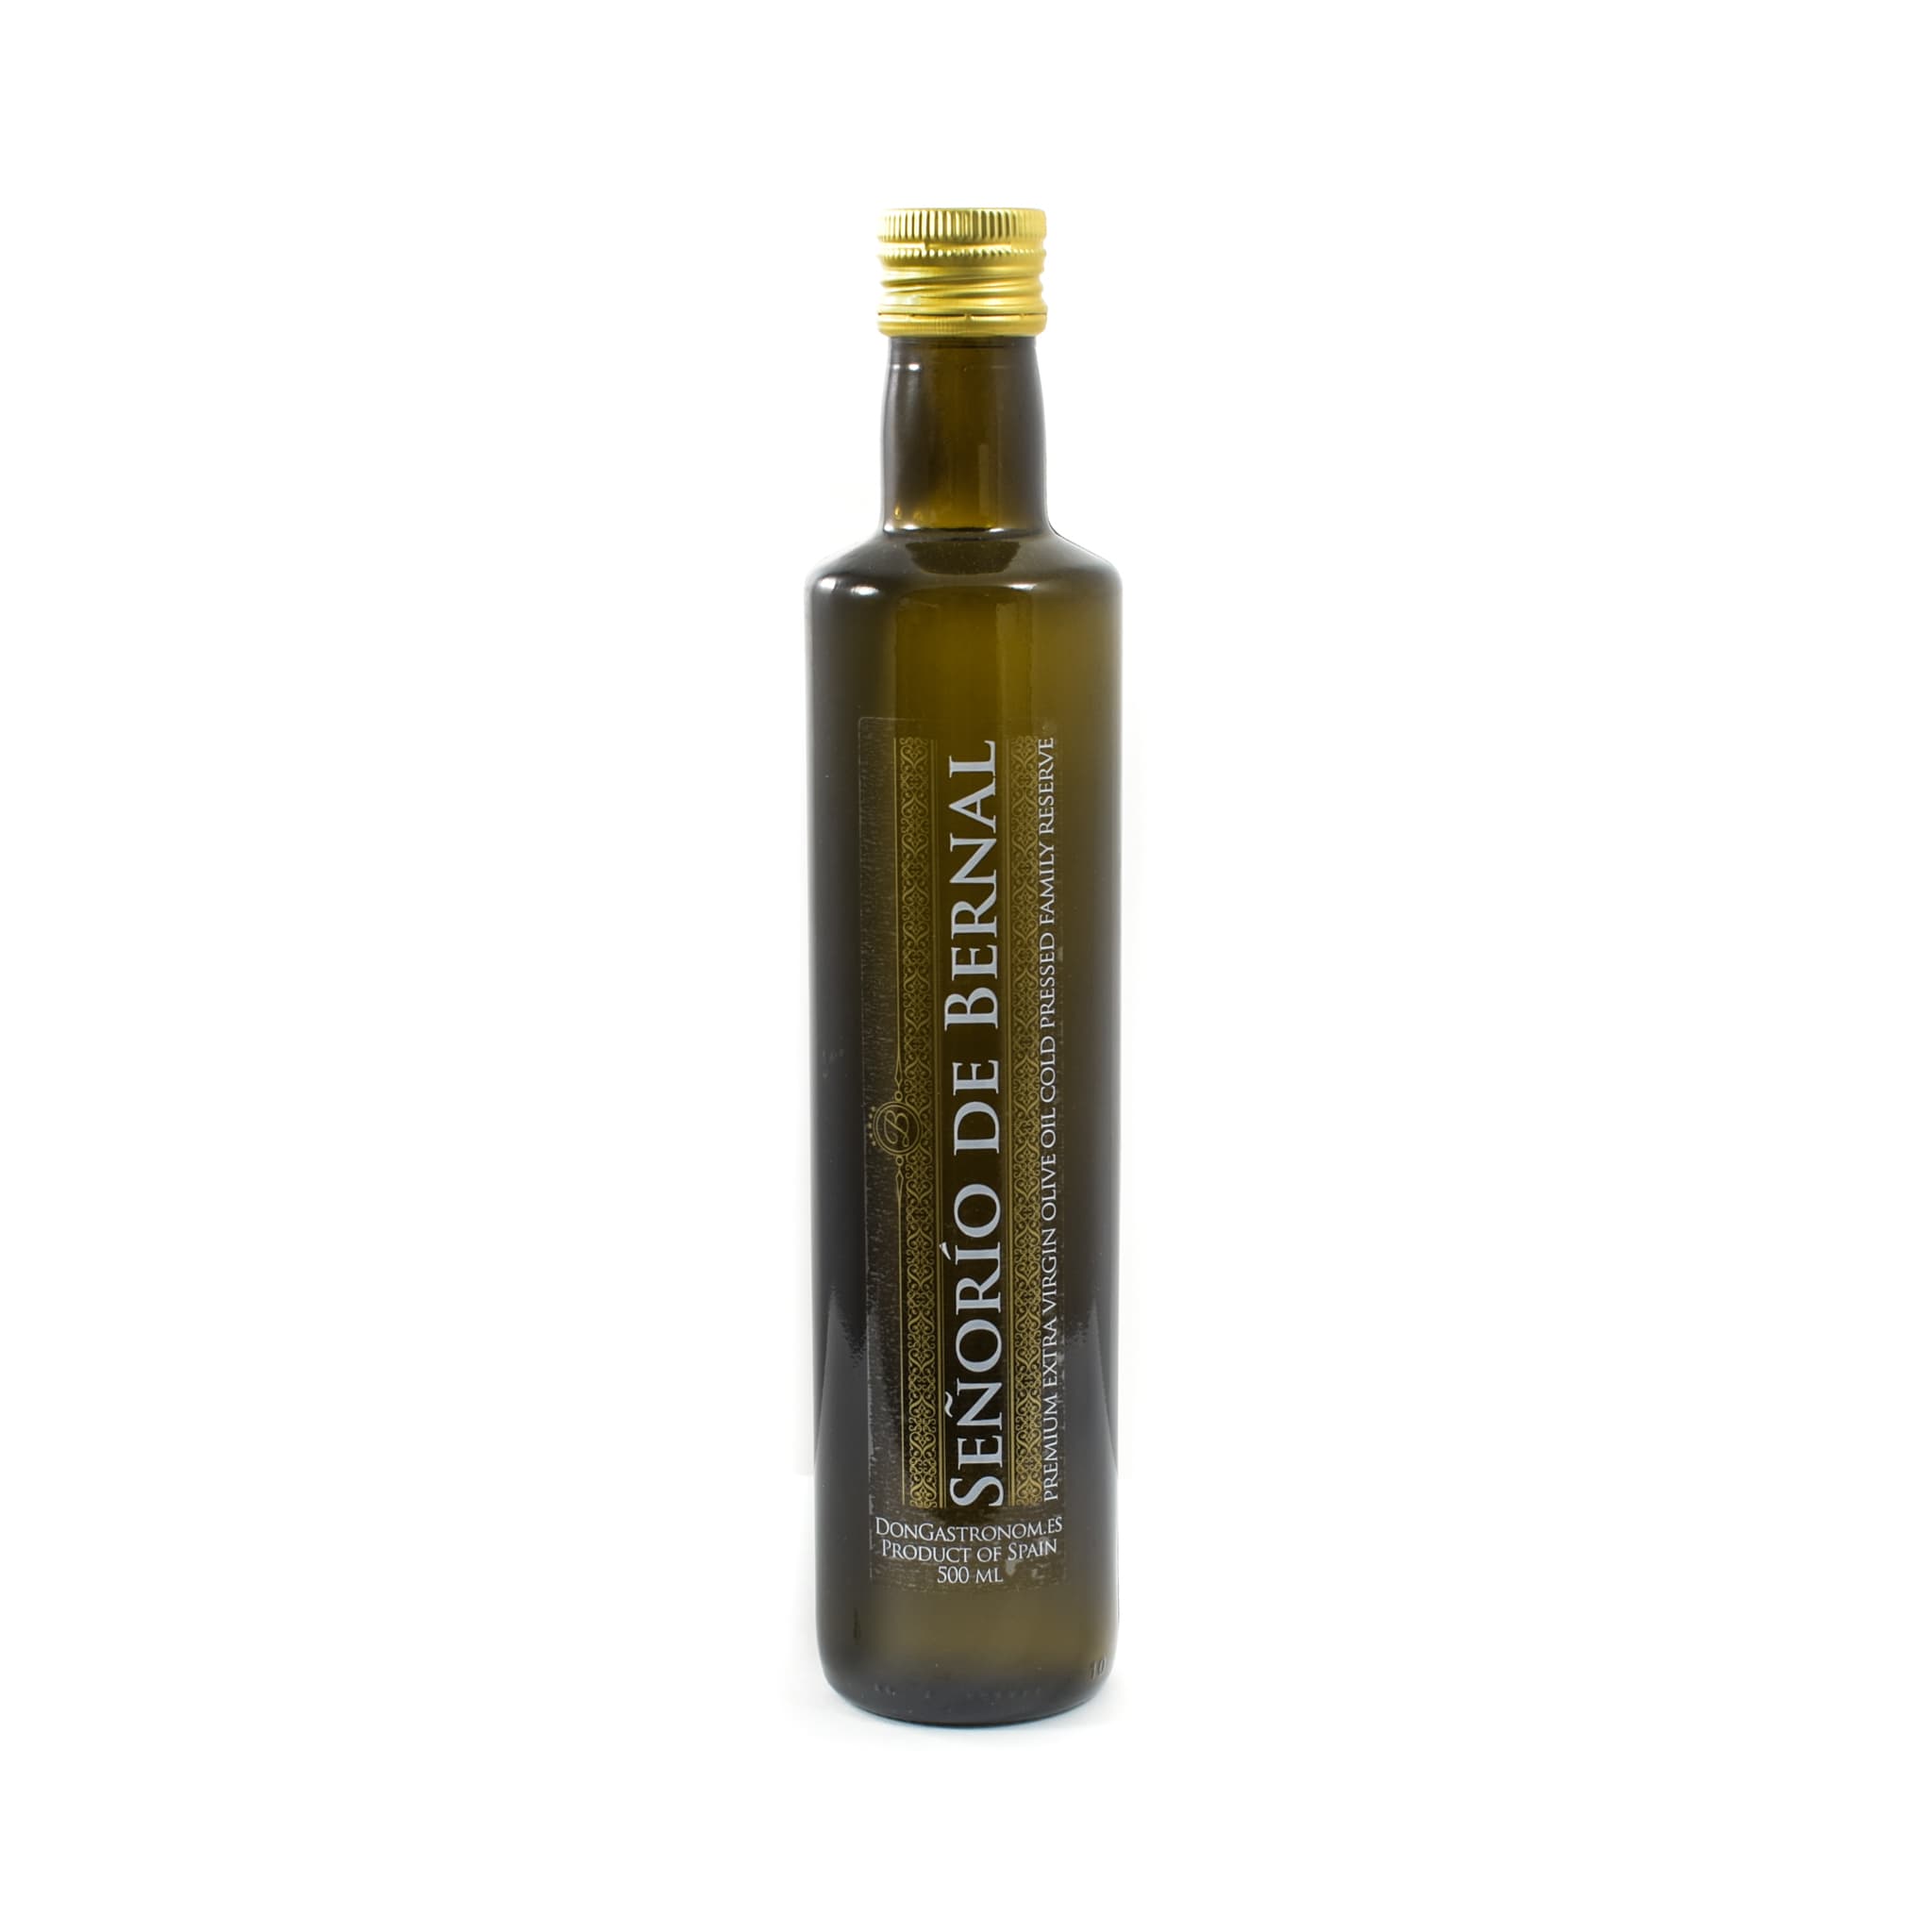 Cold Pressed Arbequina & Picual Extra Virgin Olive Oil